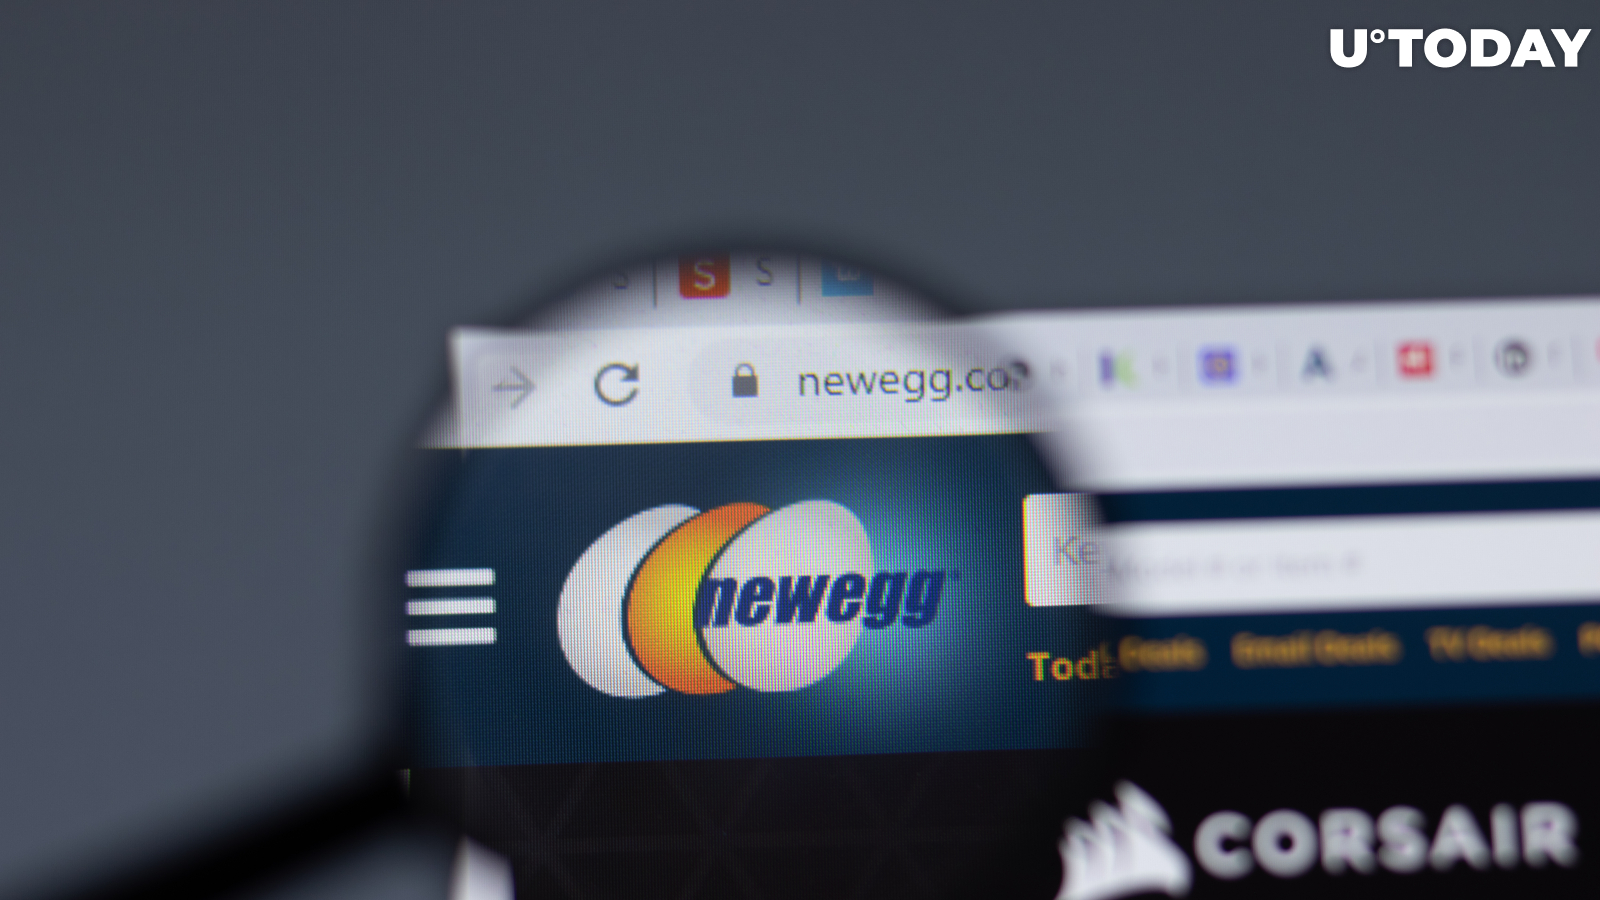 Online Retail Giant Newegg Starts Accepting Dogecoin